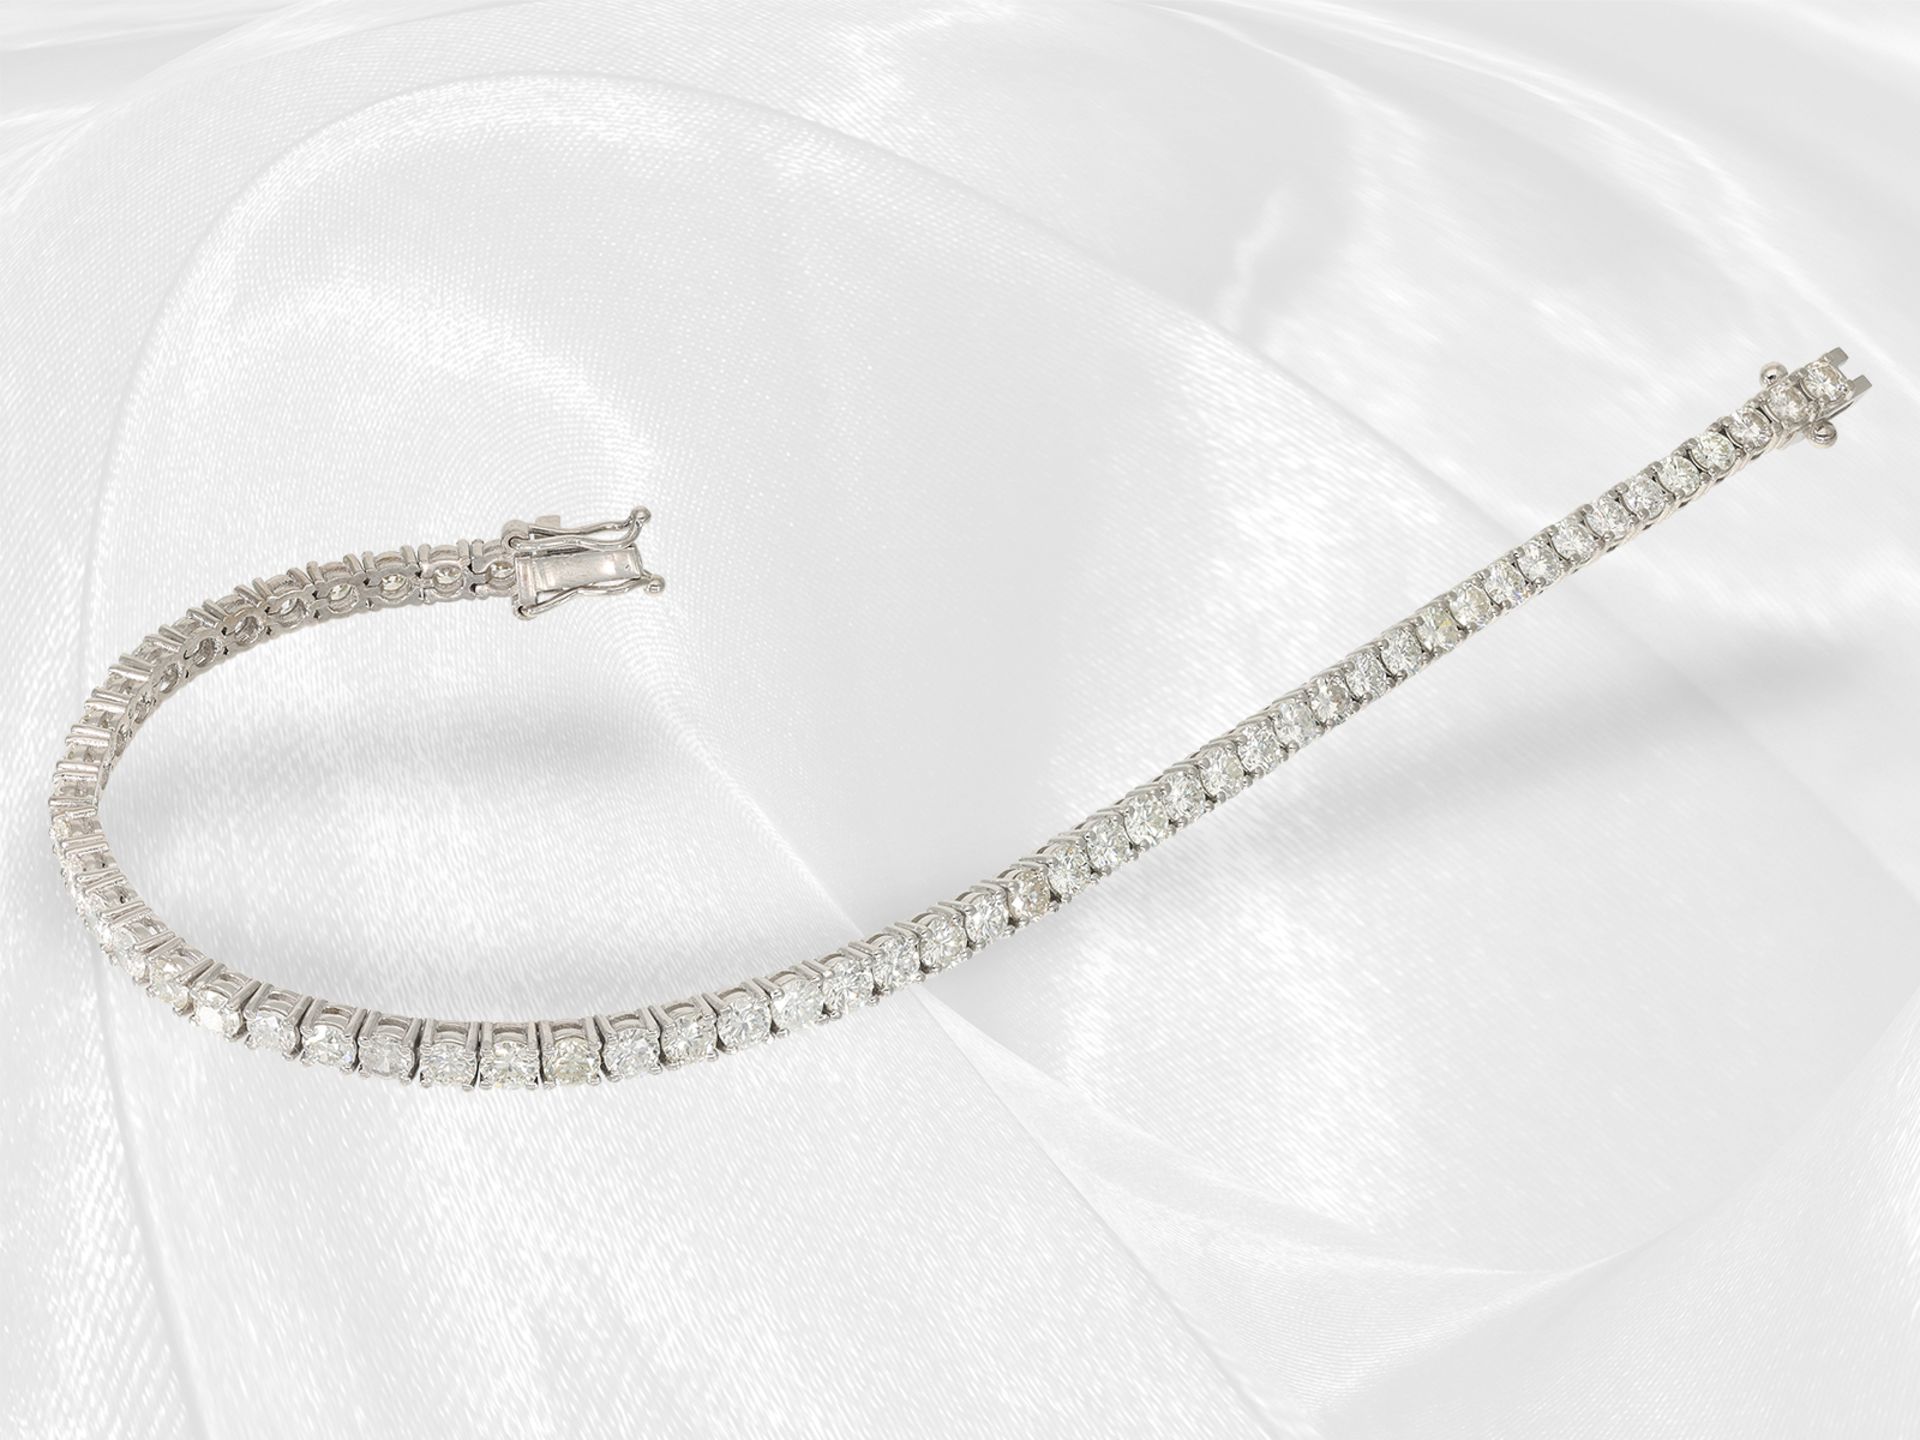 High quality handmade tennis bracelet with approx. 5.5ct brilliant-cut diamonds, 18K white gold - Image 3 of 3